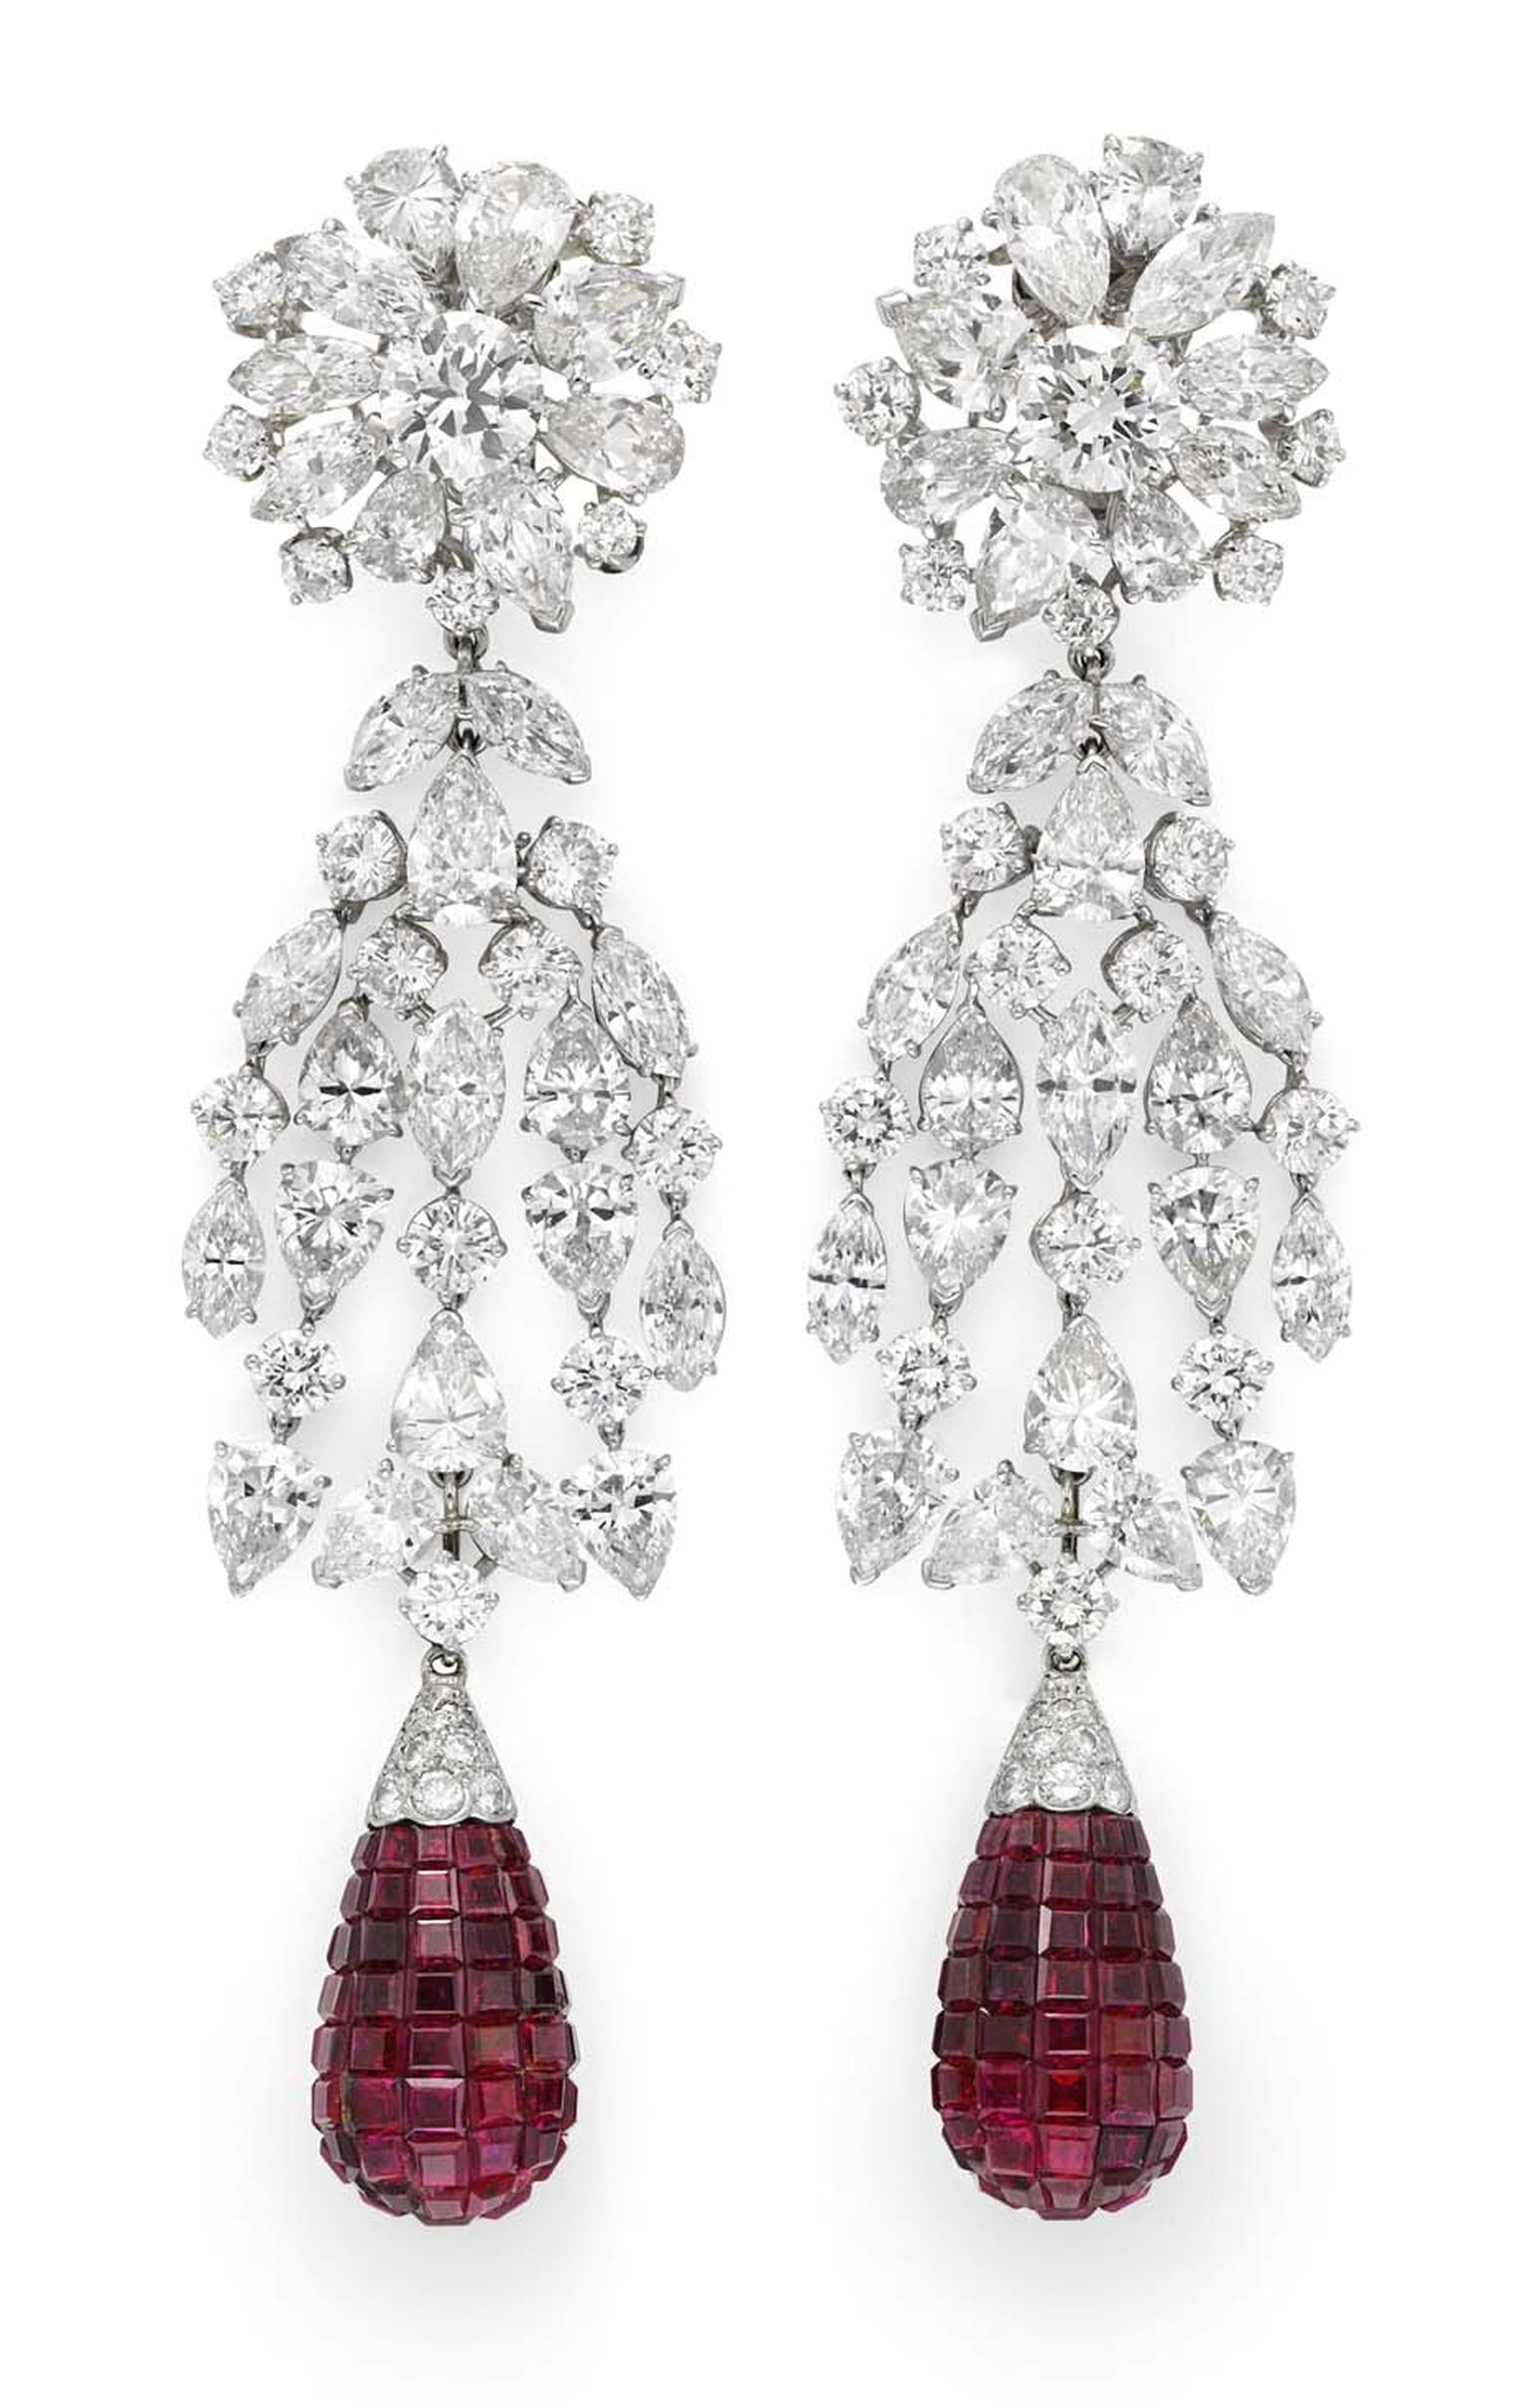 Pair of invisibly set ruby and diamond cascade earrings by Van Cleef & Arpels, available at Simon Teakle.